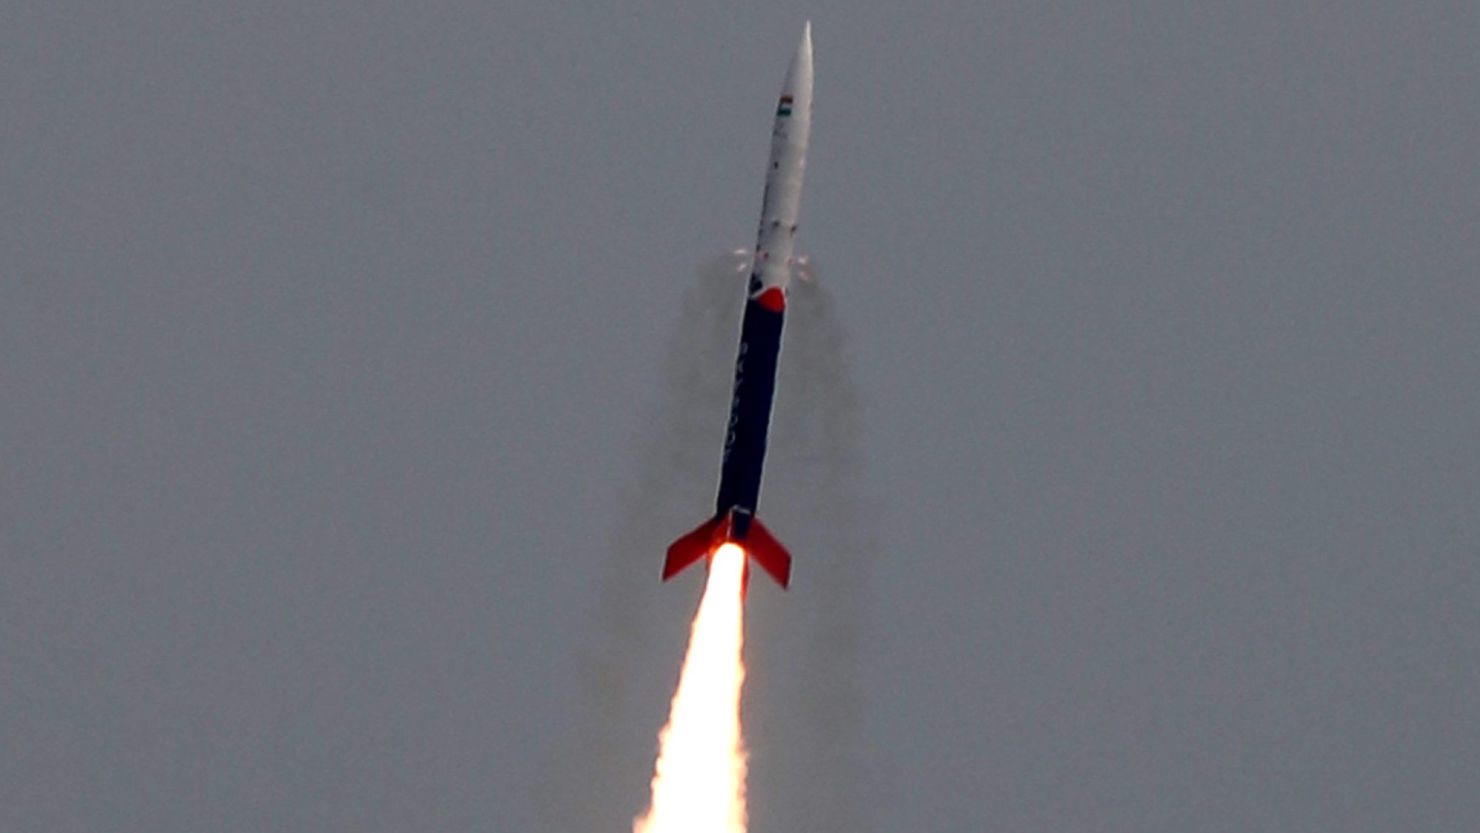 Vikram-S was launched from the Sriharikota spaceport on Friday.